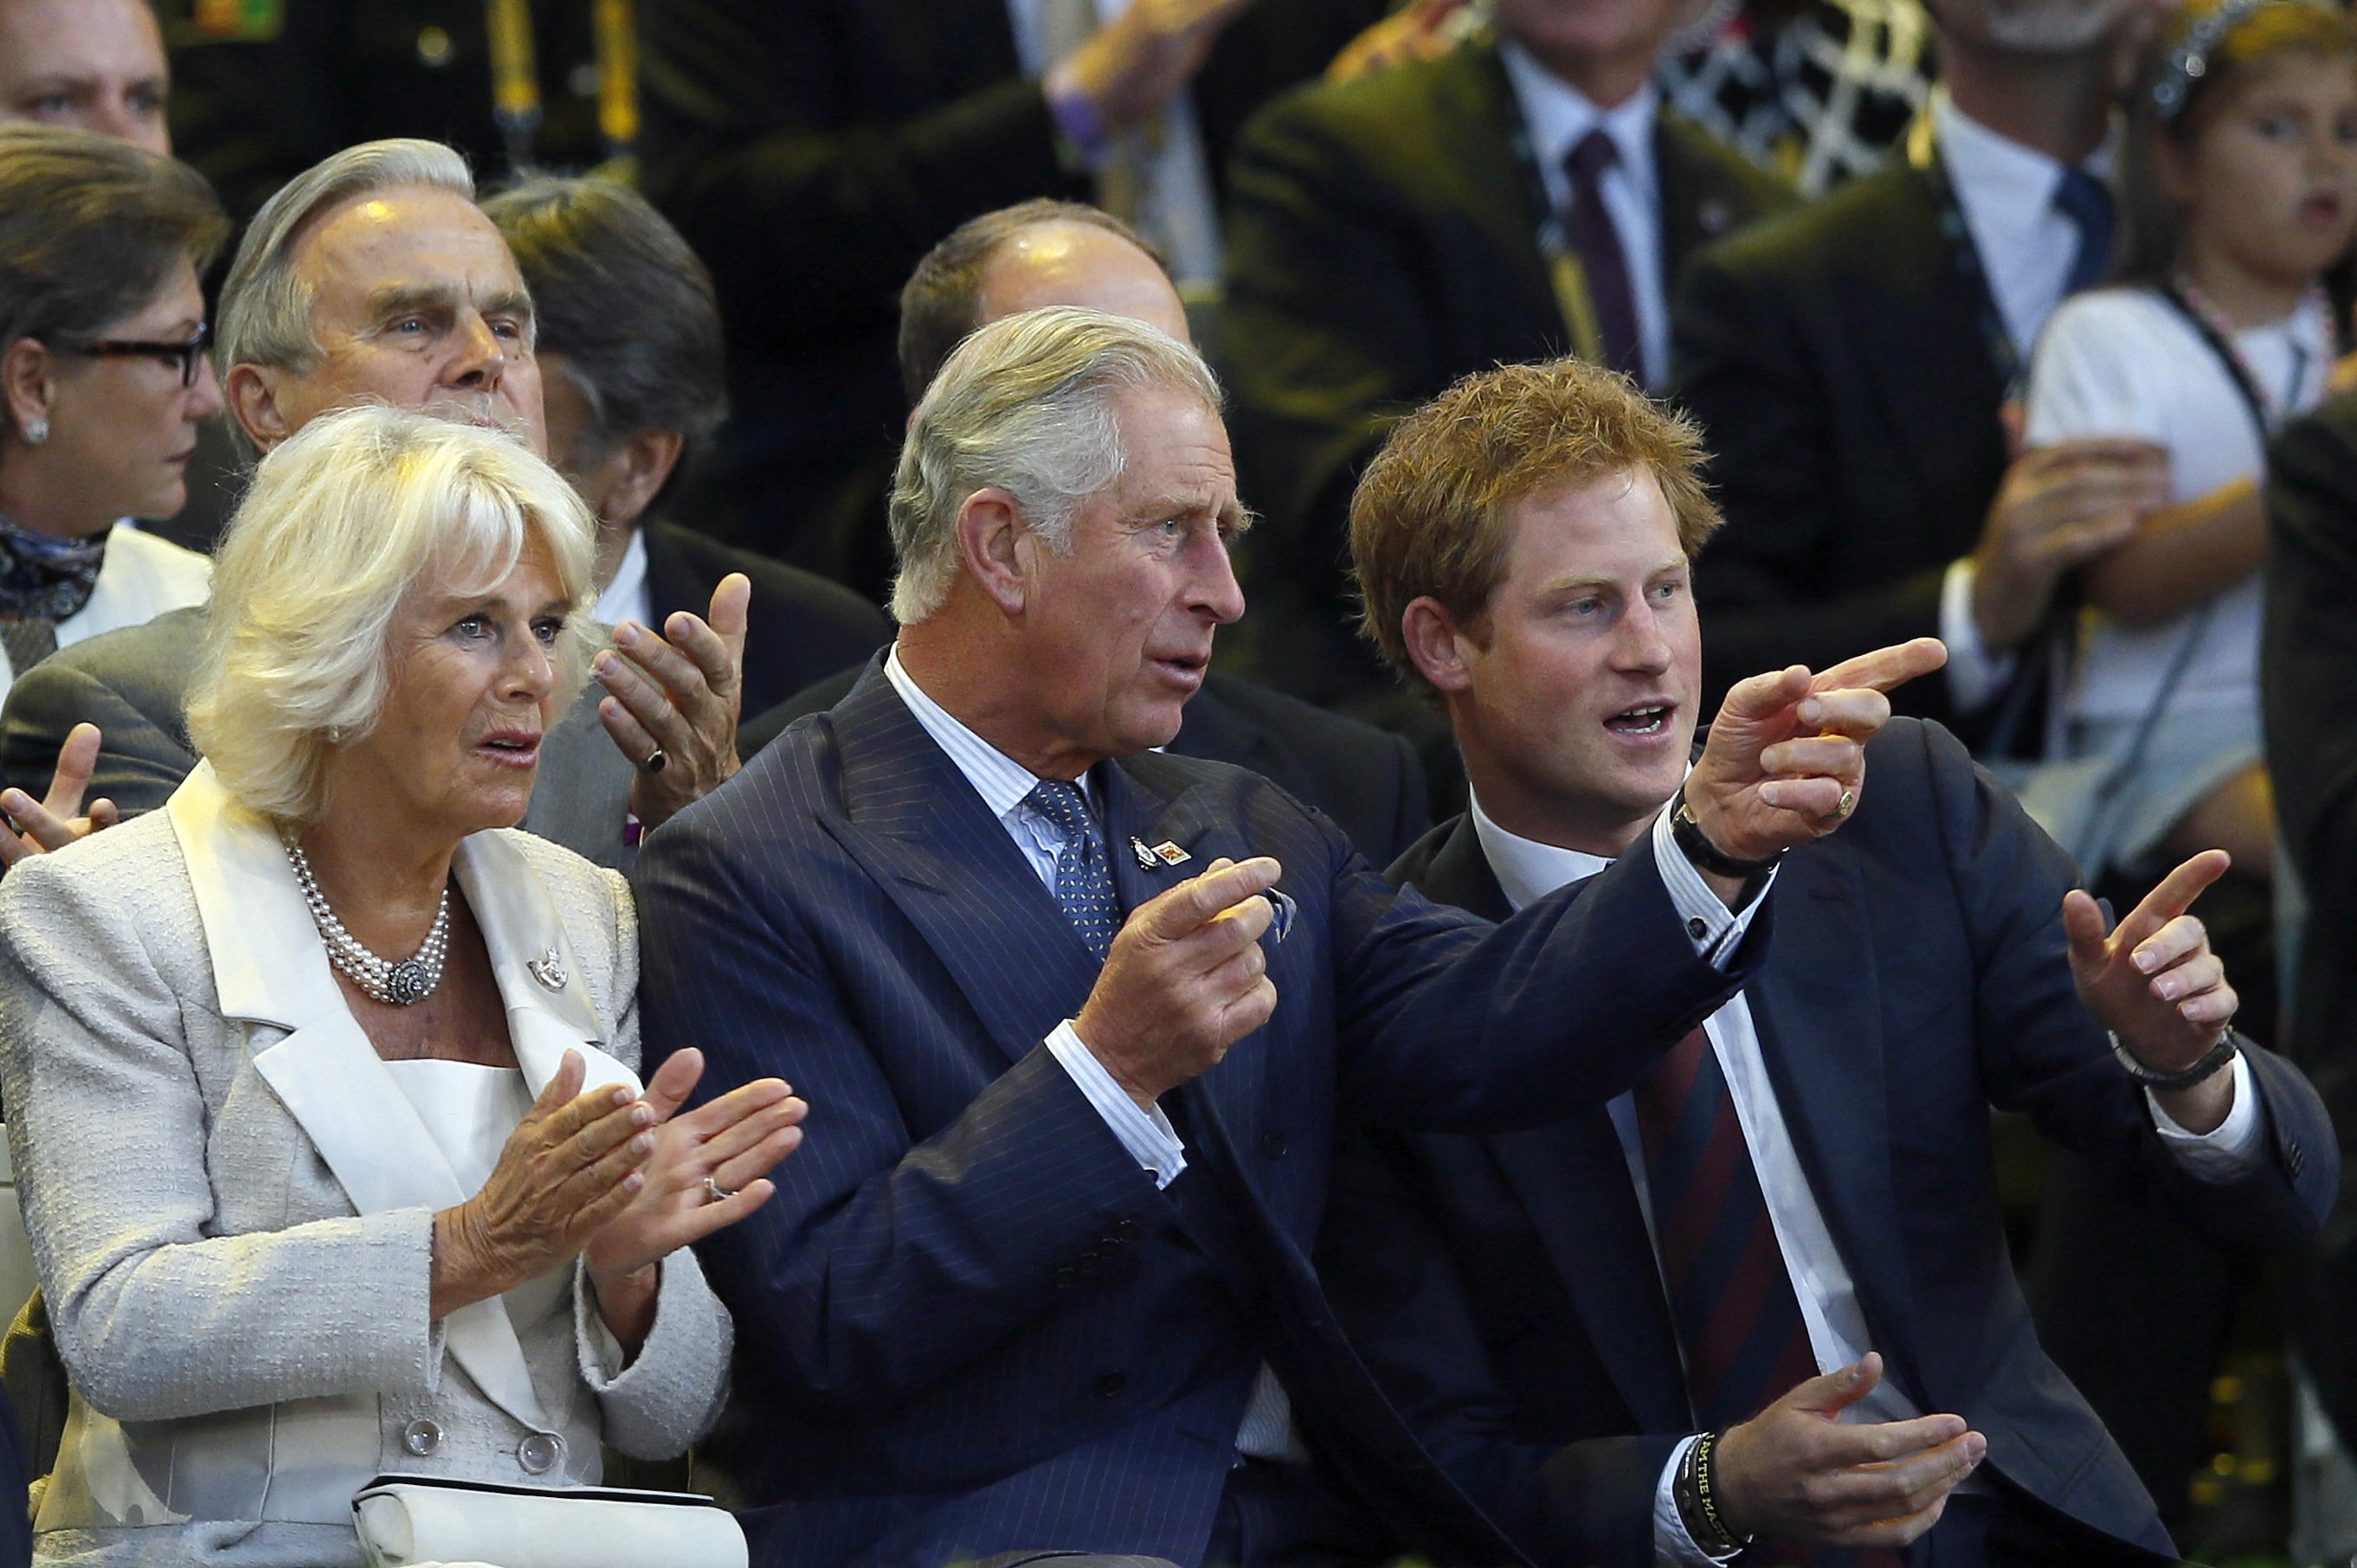 Prince Charles sits next to his wife Camilla and his son Prince Harry during the opening ceremony of the Invictus Games at Queen Elizabeth II Park in London on September 10, 2014 | Source: Getty Images